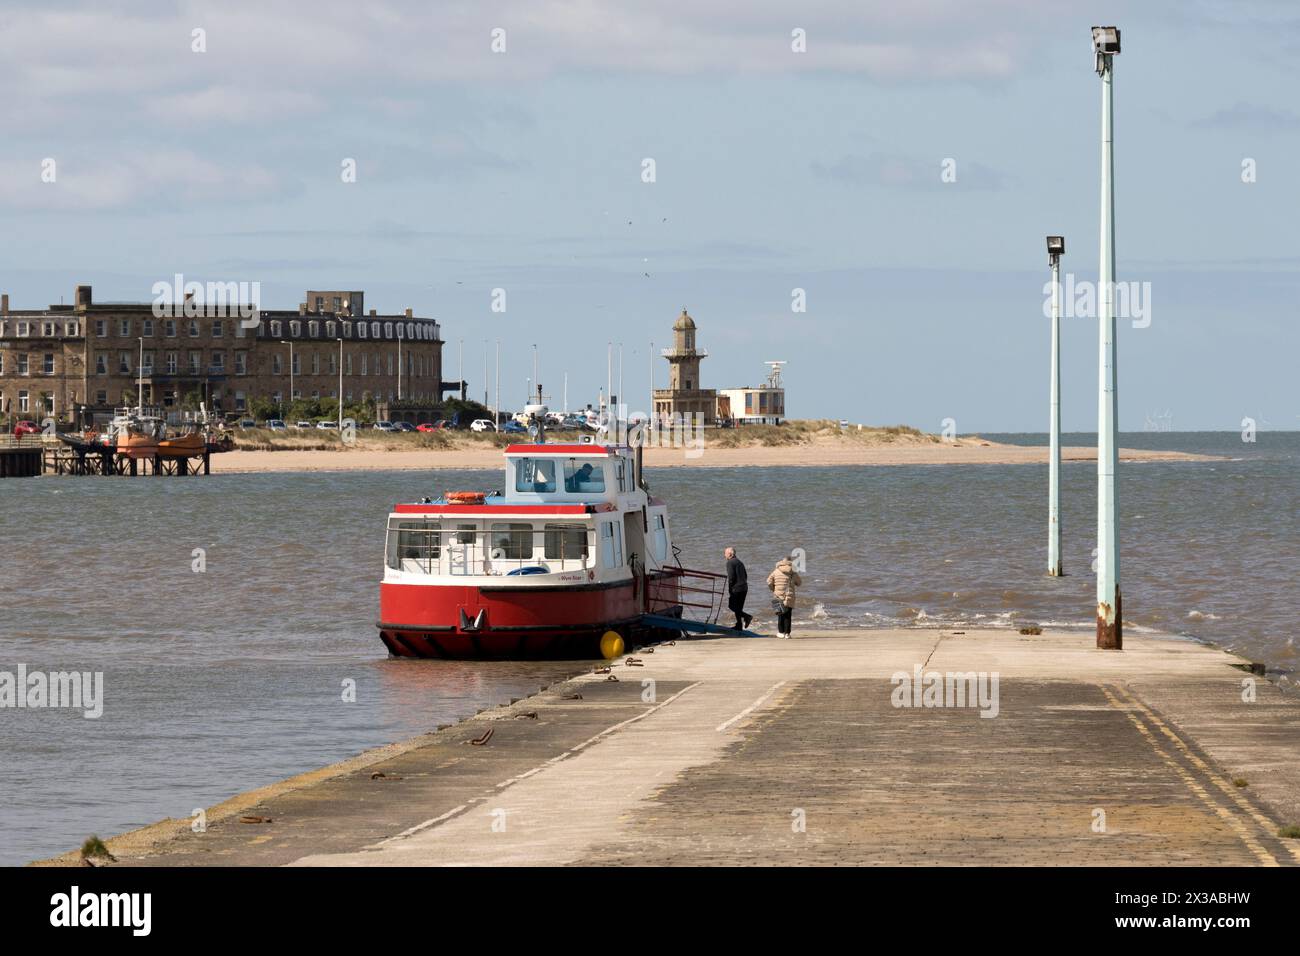 The ferry waits to depart from the slipway at Knott End-on-Sea, across the estuary to Fleetwood, Lancashire. The scene was painted by L. S. Lowry. Stock Photo